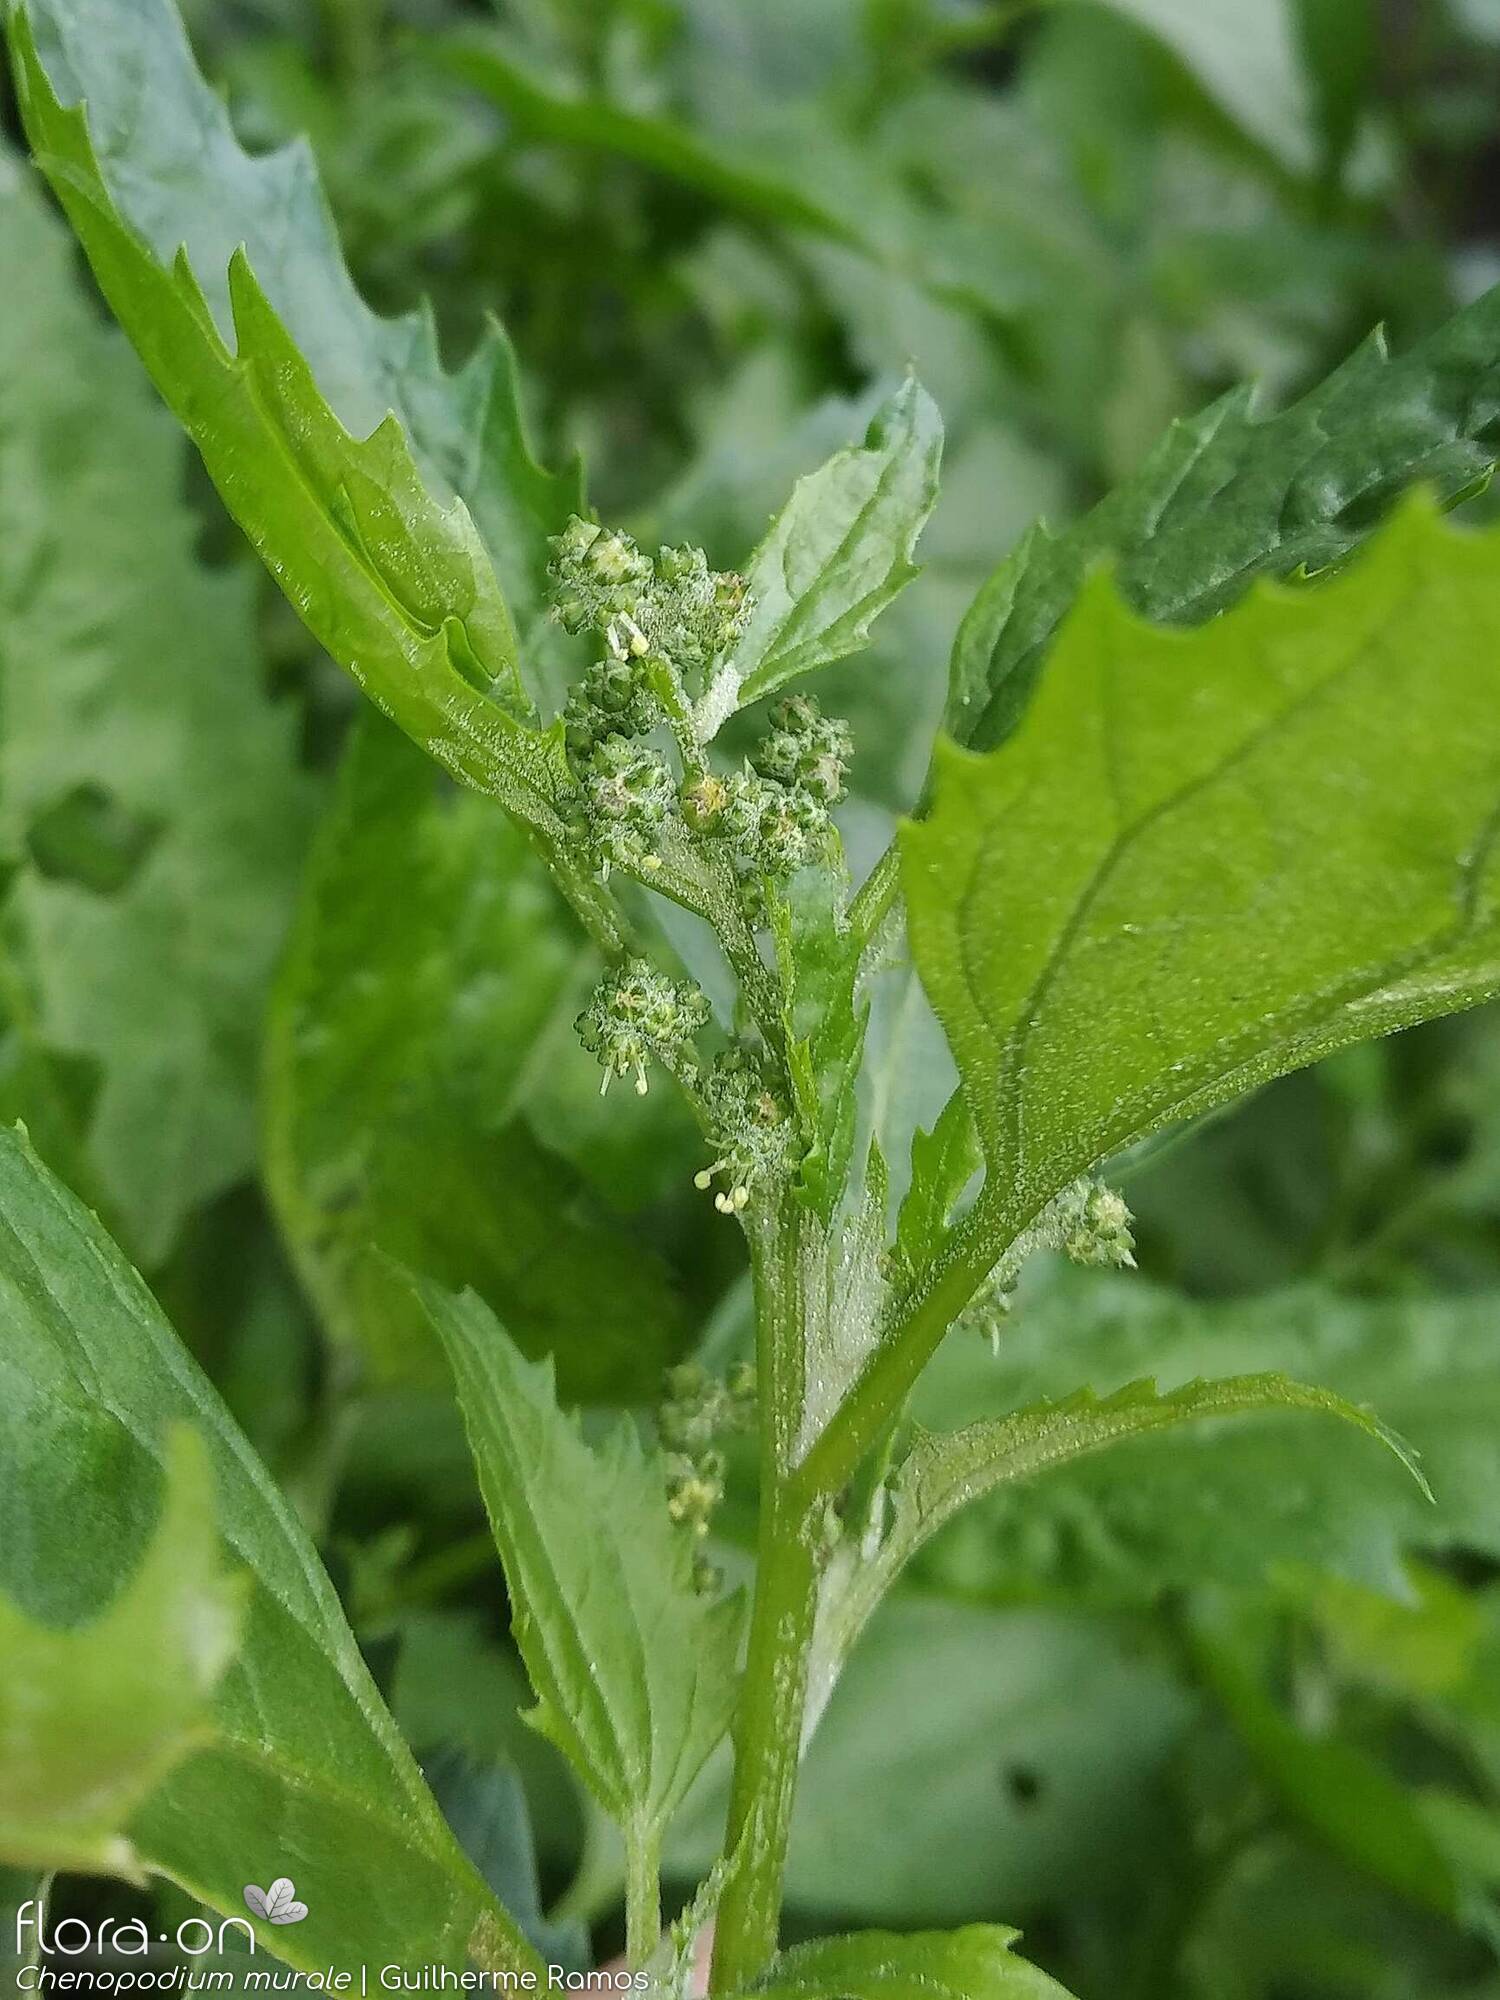 Chenopodium murale - Flor (geral) | Guilherme Ramos; CC BY-NC 4.0